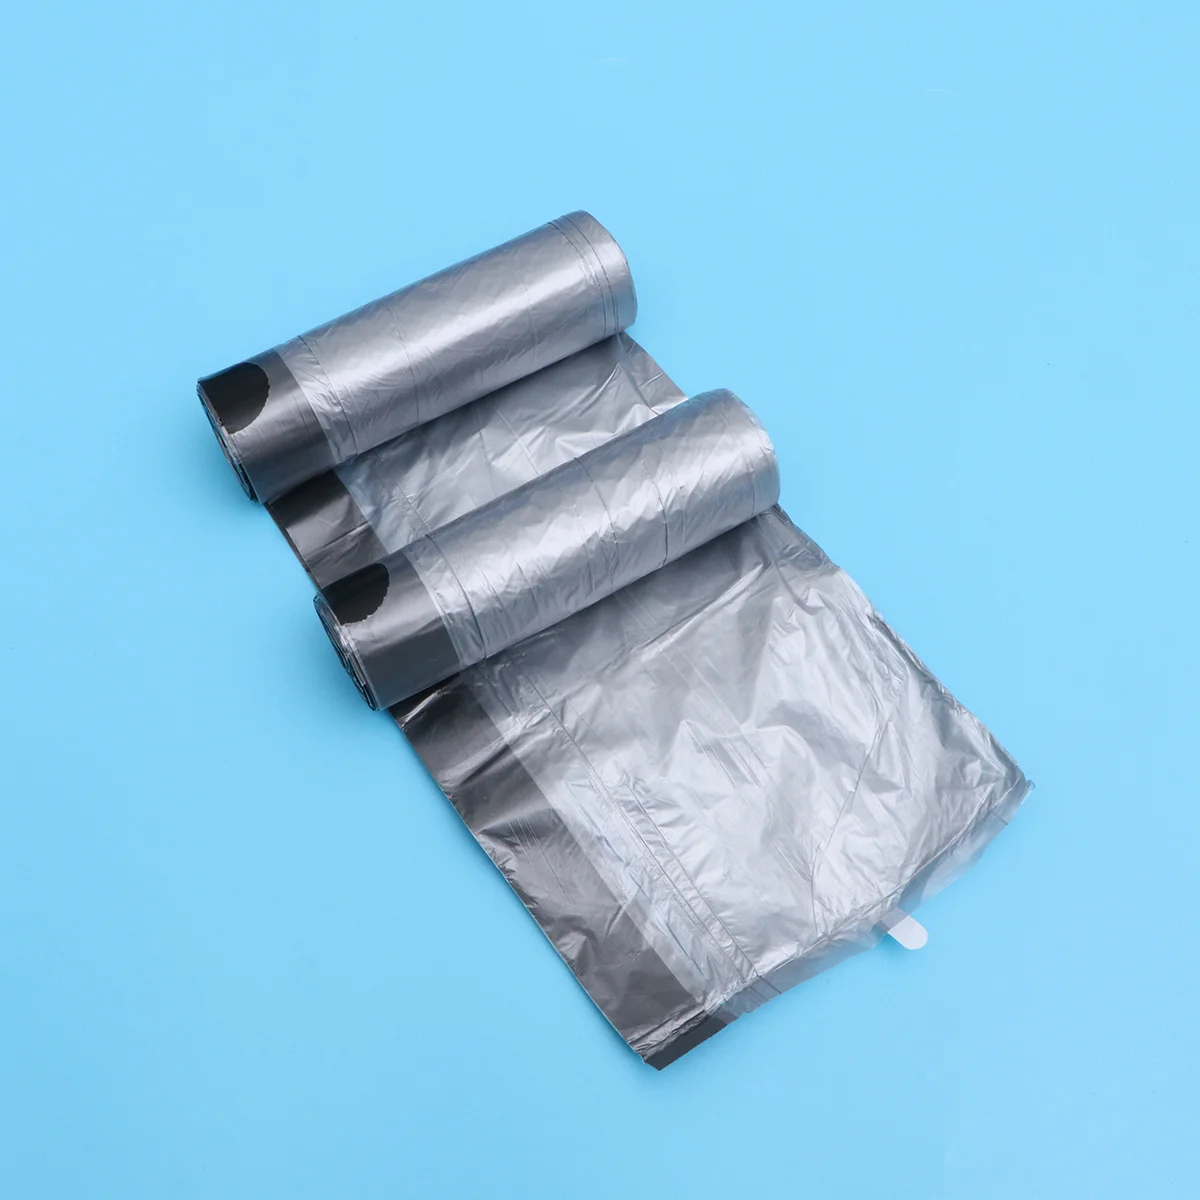 

5Rolls 75Pcs Thick Garbage Bags Roll Cover Storage Bag For Home Waste Trash Bags Automatic Closing Up (Metallic)